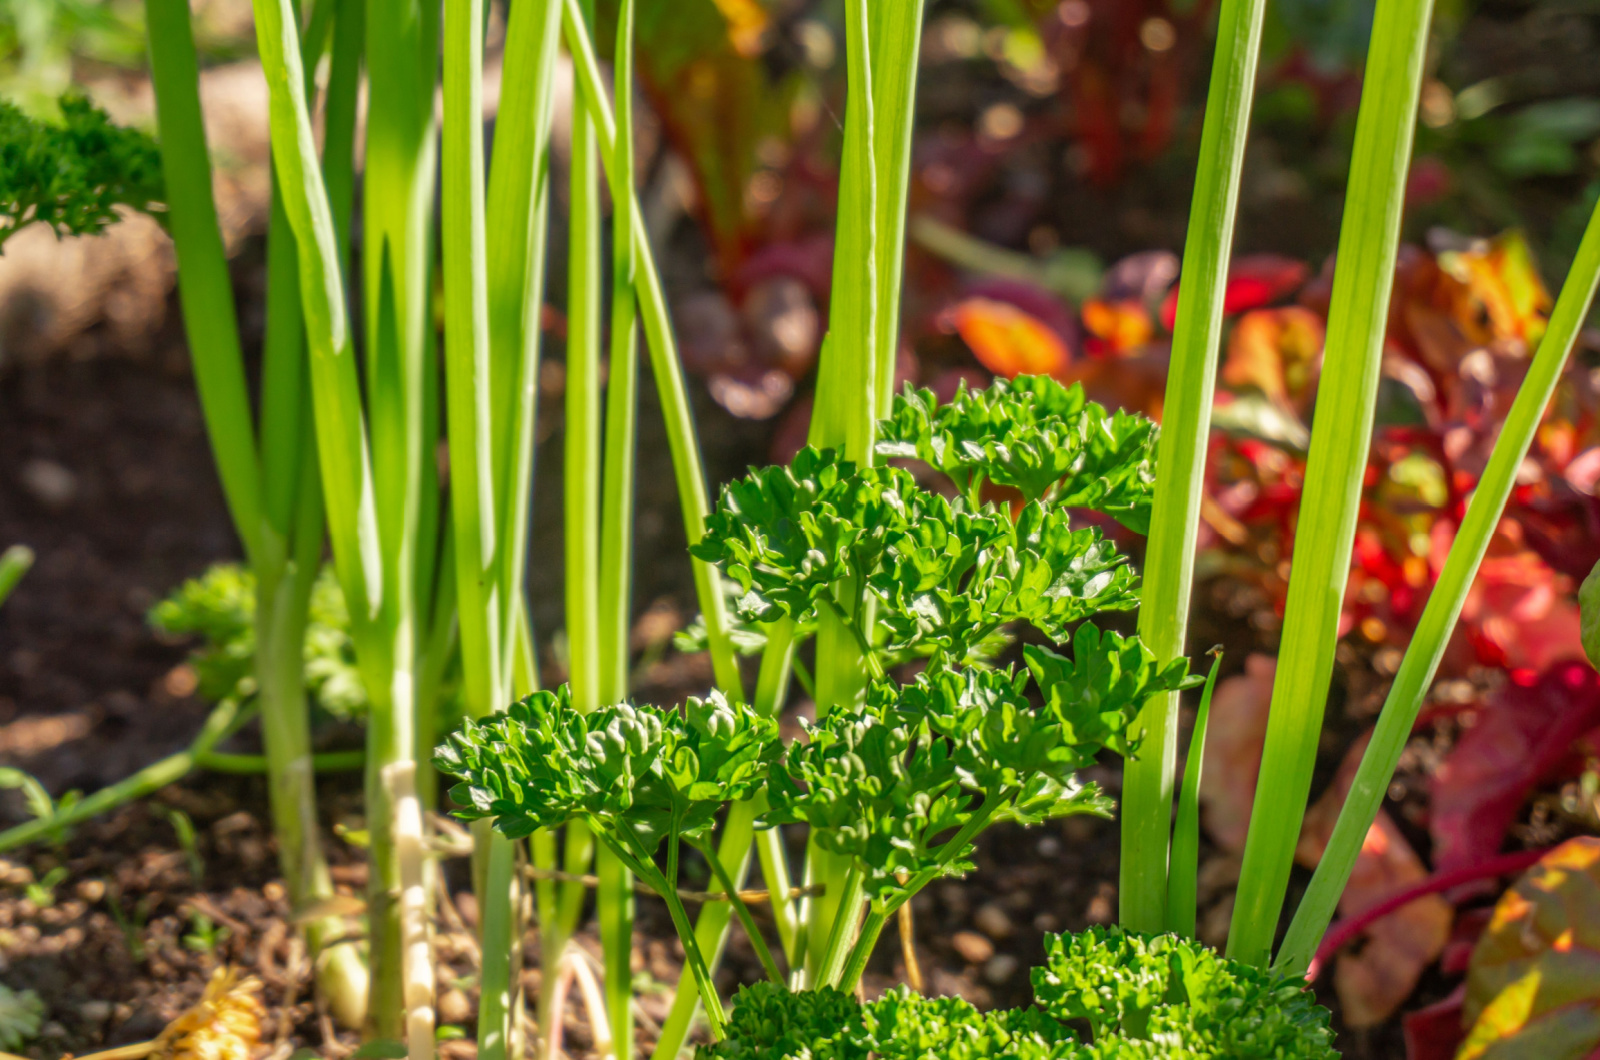 Parsley herb and spring onions growing in garden